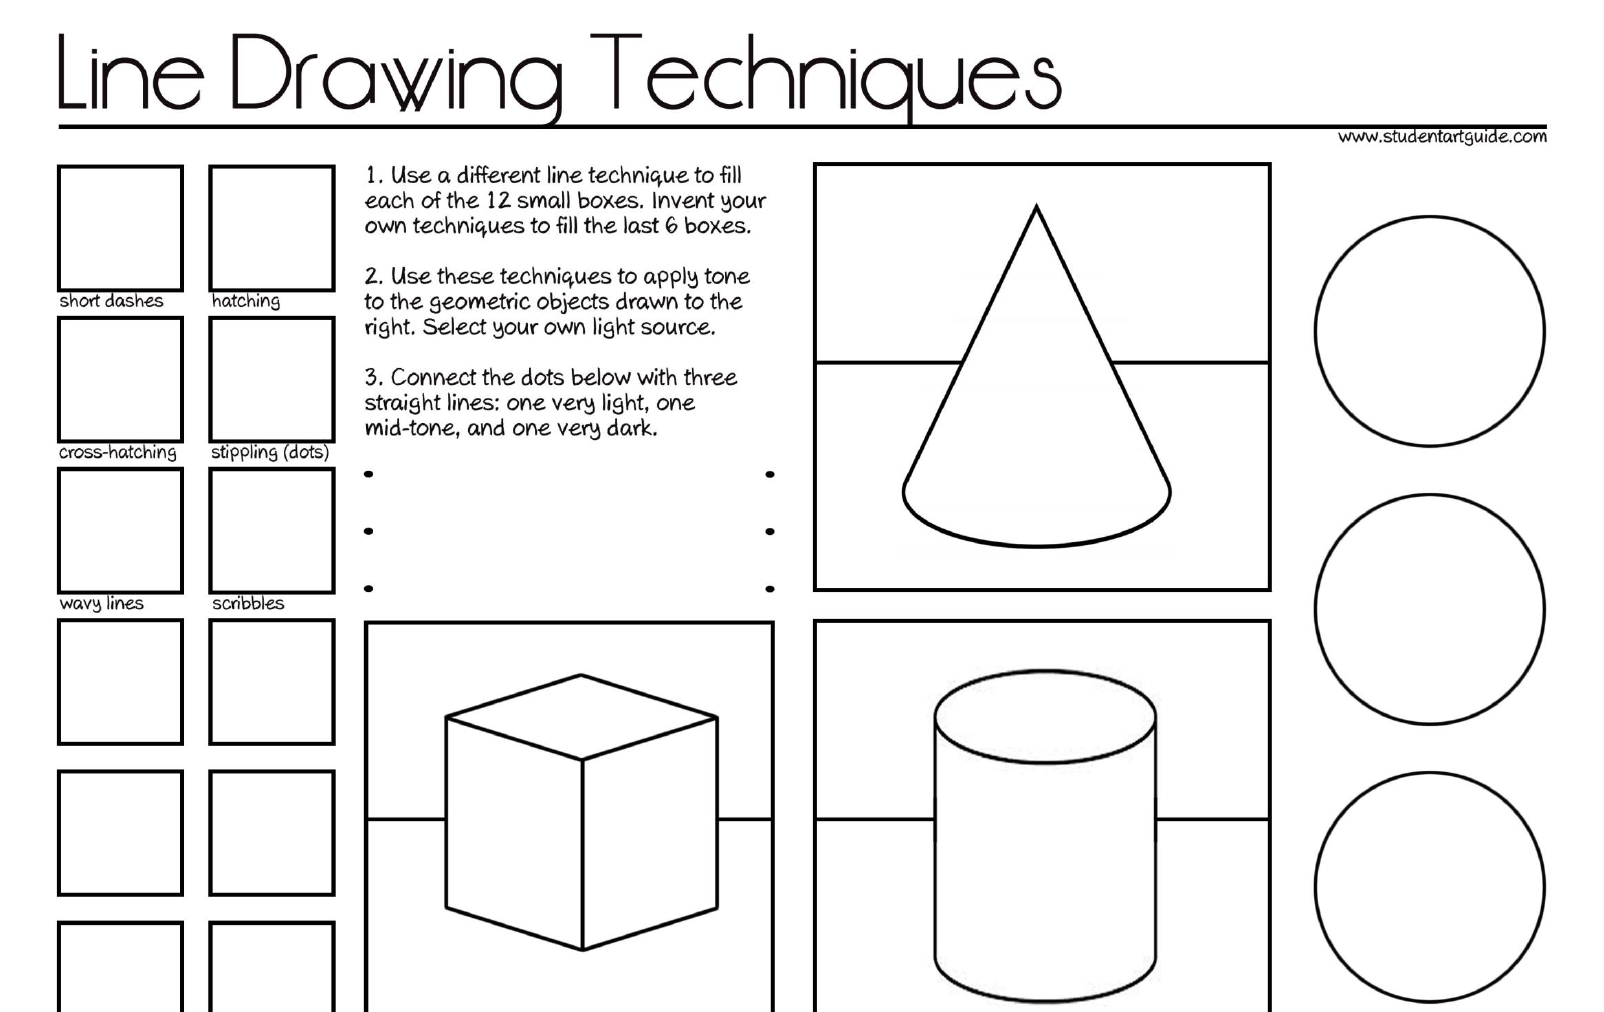 Line Drawing Techniques Worksheet Image